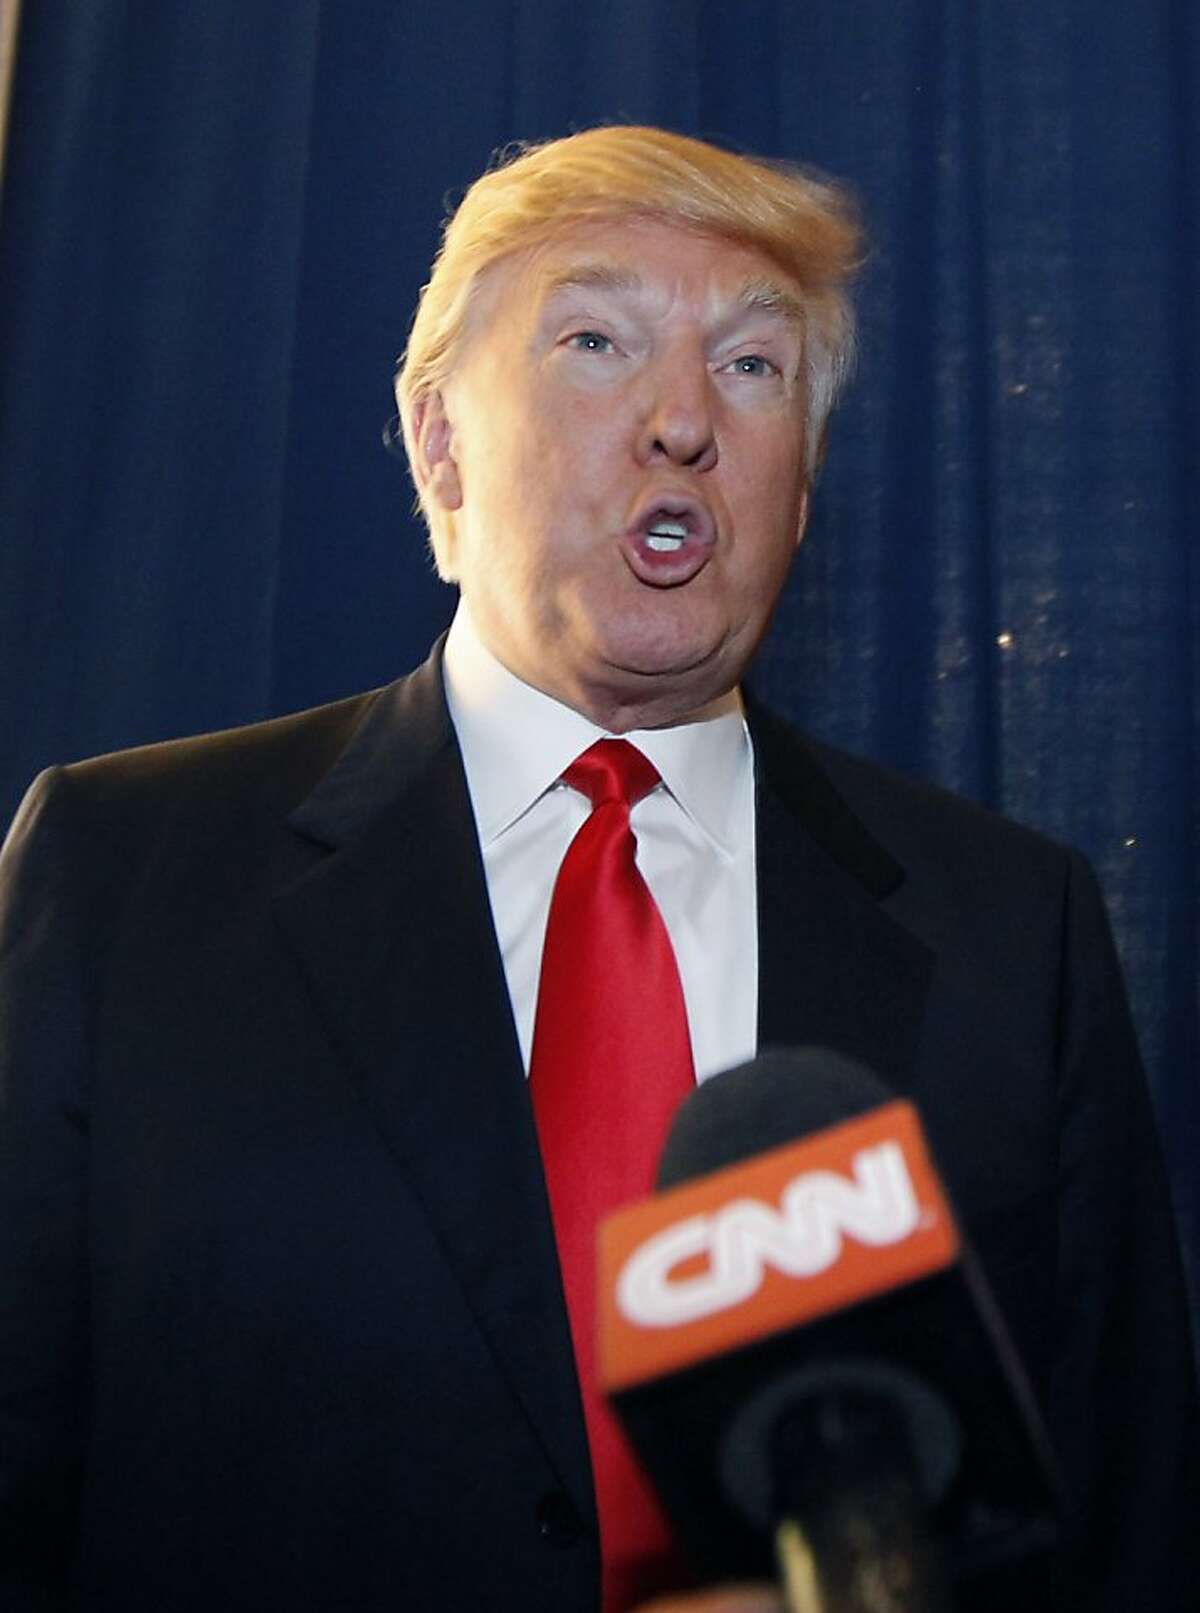 FILE - A Thursday, Feb. 2, 2012 photo from files showing Donald Trump talking to reporters prior to a news conference in Las Vegas with Republican presidential candidate, former Massachusetts Gov. Mitt Romney. Donald Trump has launched a blistering attack on Scotland's First Minister Alex Salmond over plans to build a wind farm off the coast of his luxury Scottish golf resort. In an open letter, the New York real estate tycoon calls the wind farm "horrendous" and says Salmond is "hell bent on destroying Scotland's coast line and therefore Scotland itself." Niall Stuart, chief executive of Scottish Renewables, which represents the wind farm industry, reacted with anger Friday, Feb. 10, 2012 to Trump's intervention, asking "Who is Donald Trump to tell Scotland what is good for our economy or environment?" (AP Photo/Gerald Herbert, File)